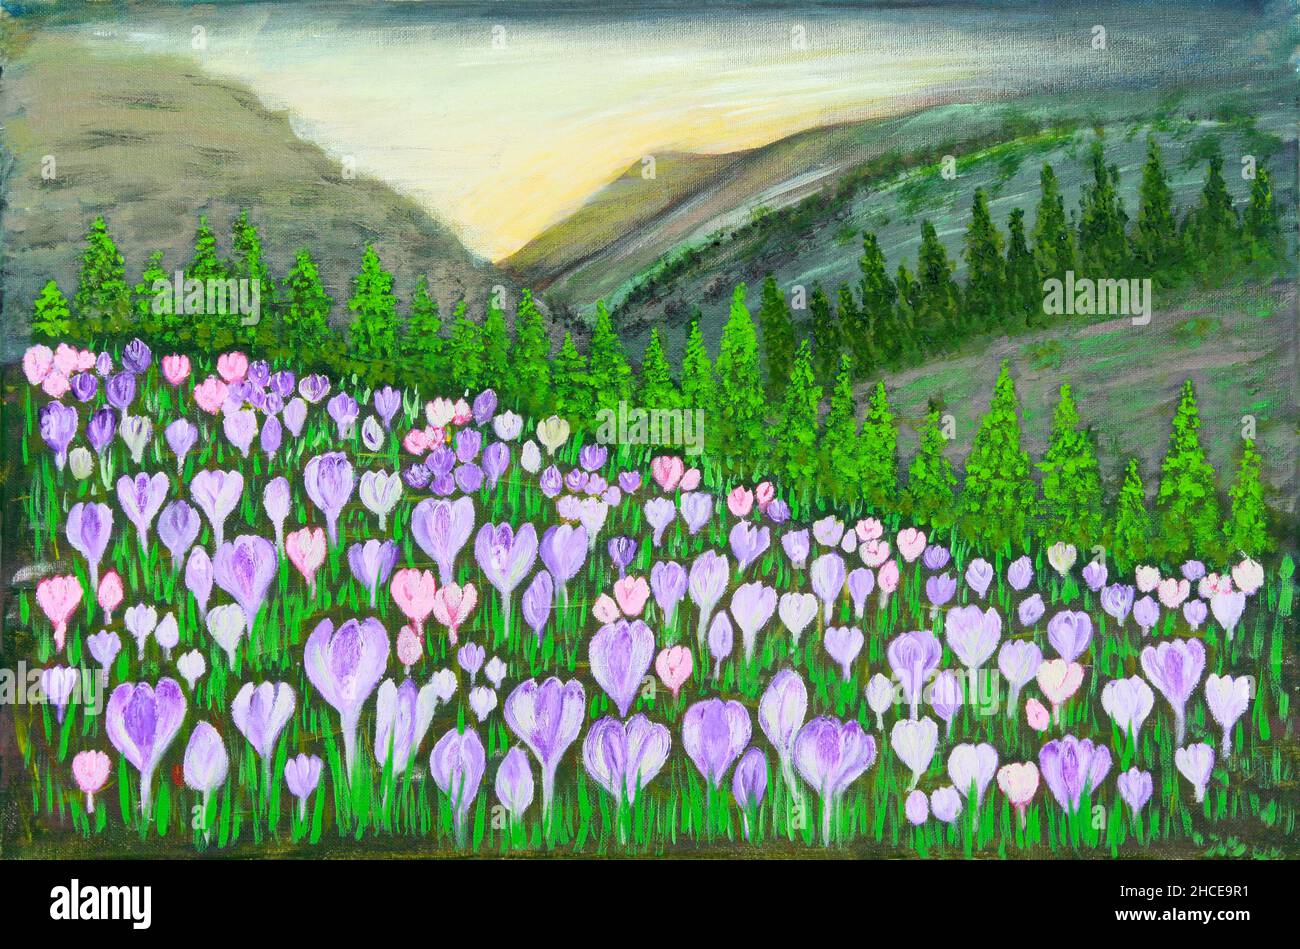 Oil painting on canvas of rolling hillside filled with colorful blooming crocuses in spring Stock Photo